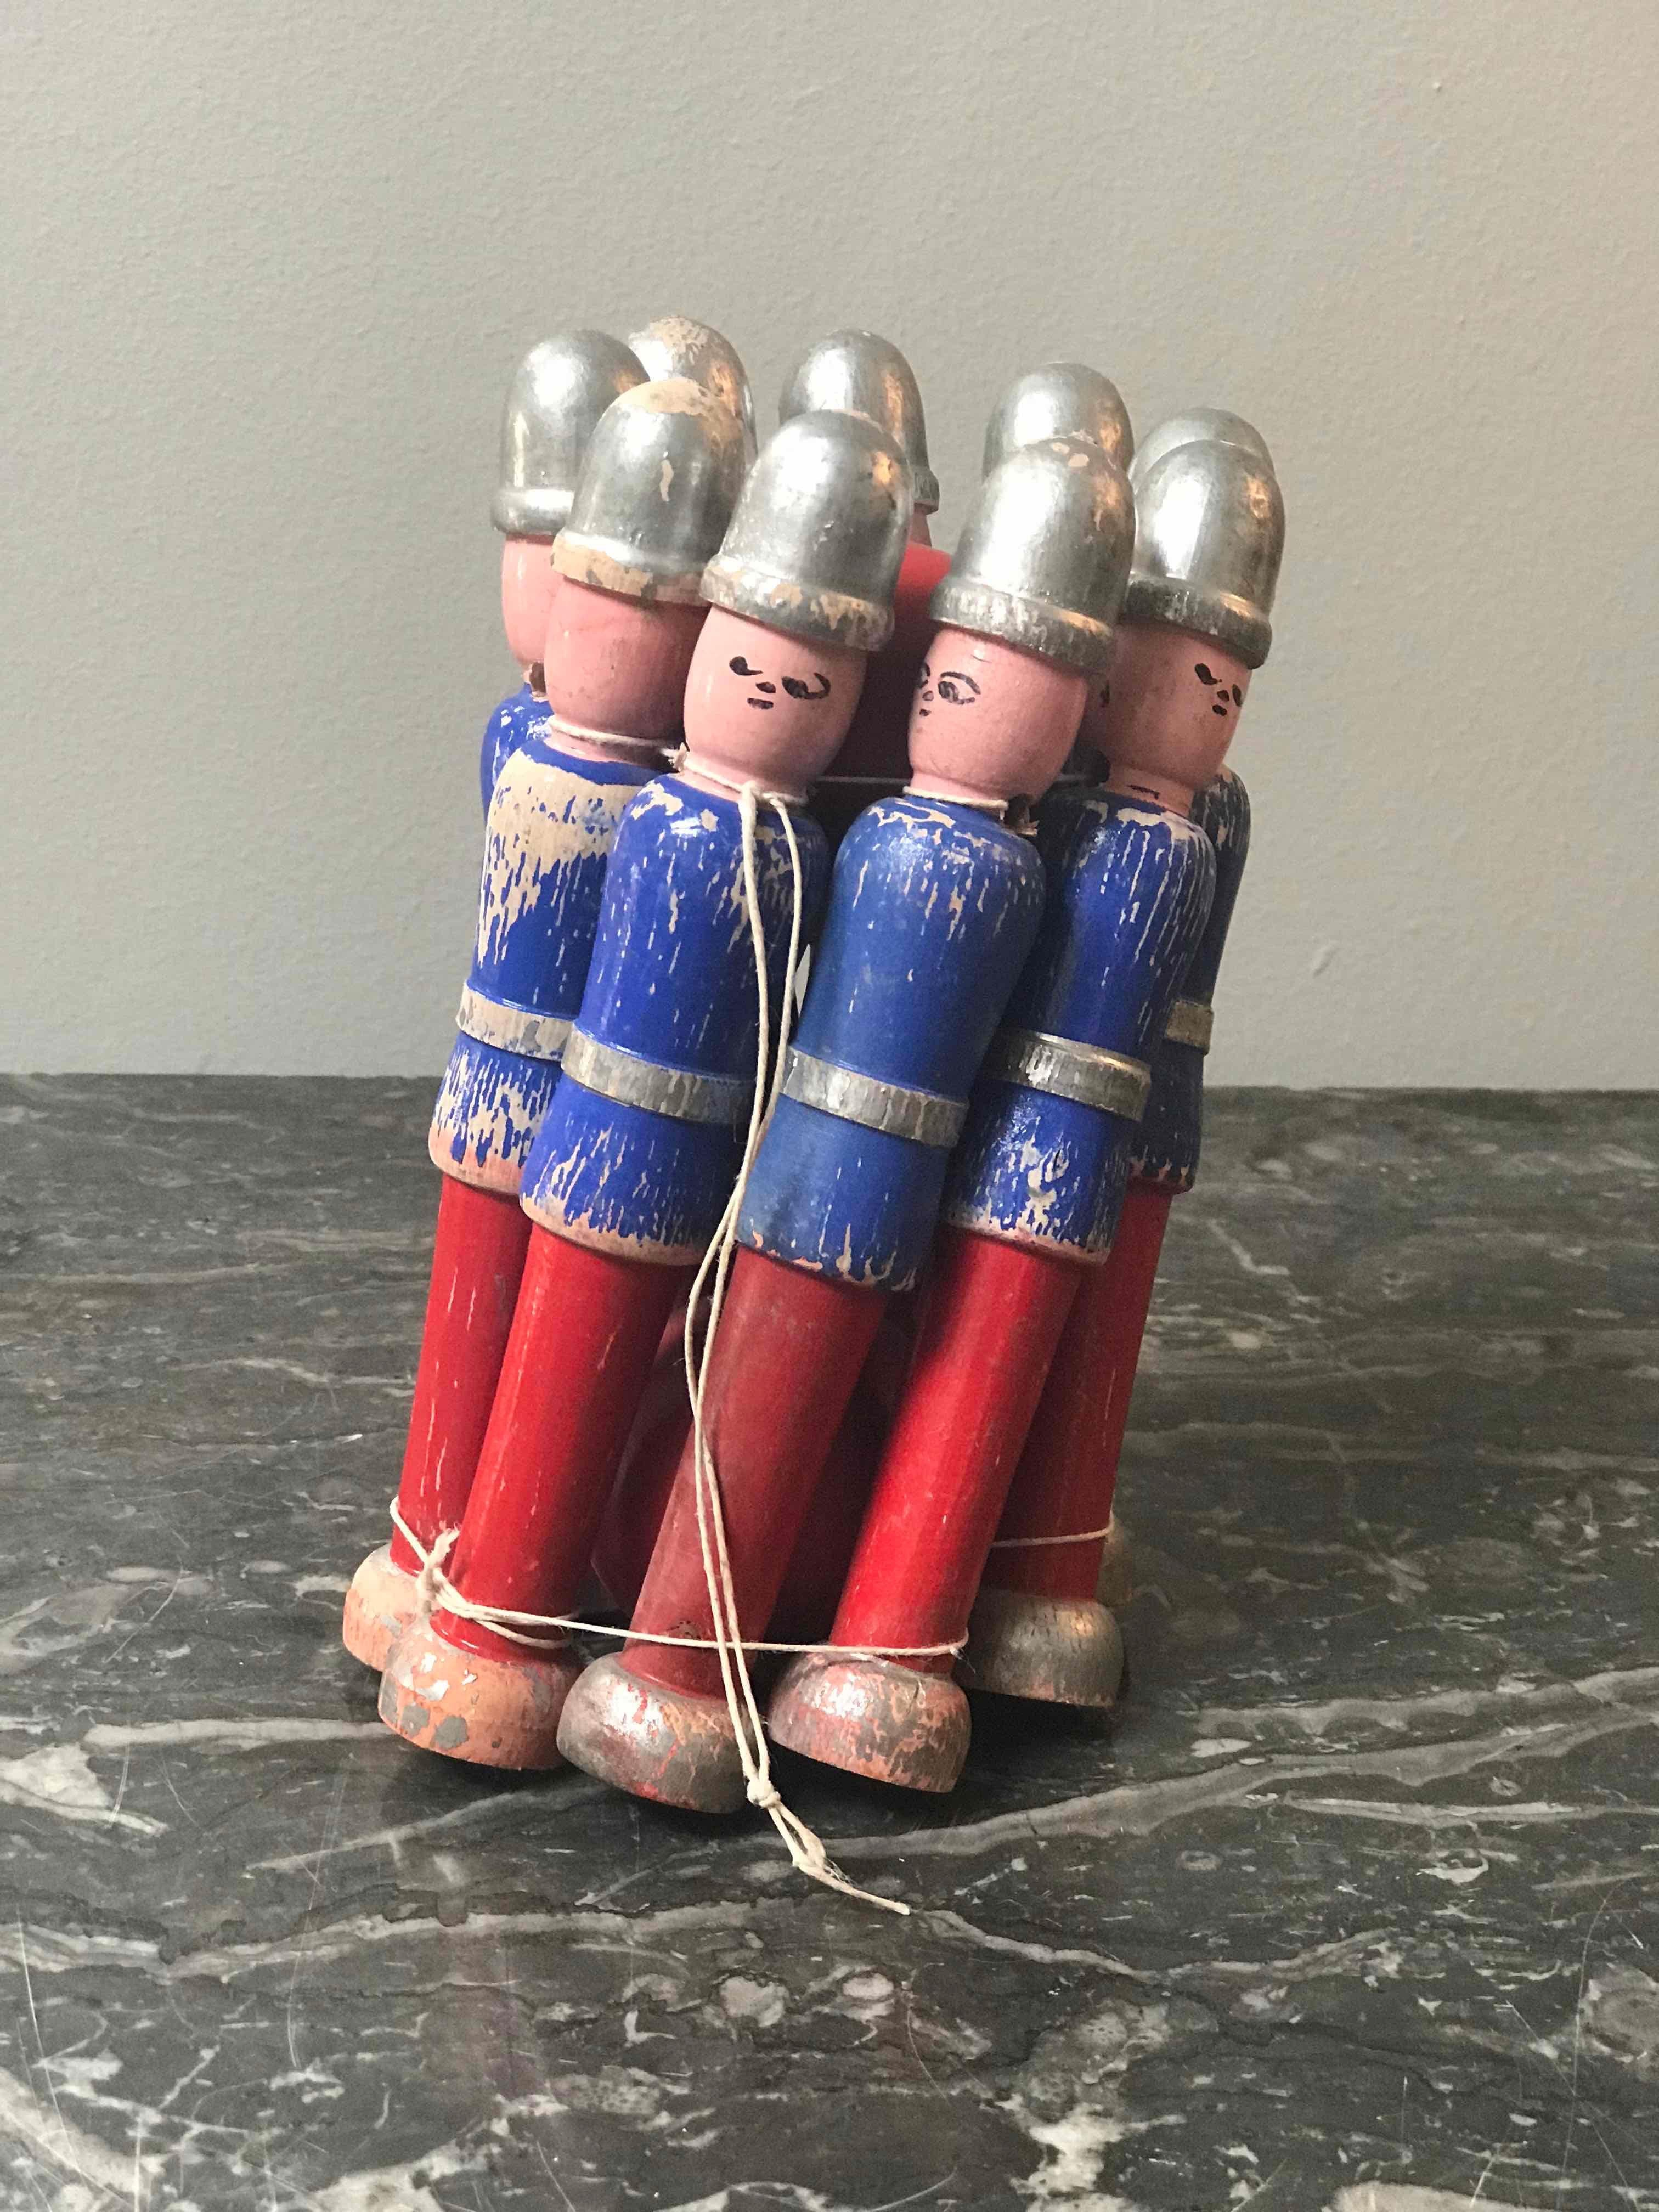 Carved and painted children's toy skittle game from England circa 1940. 